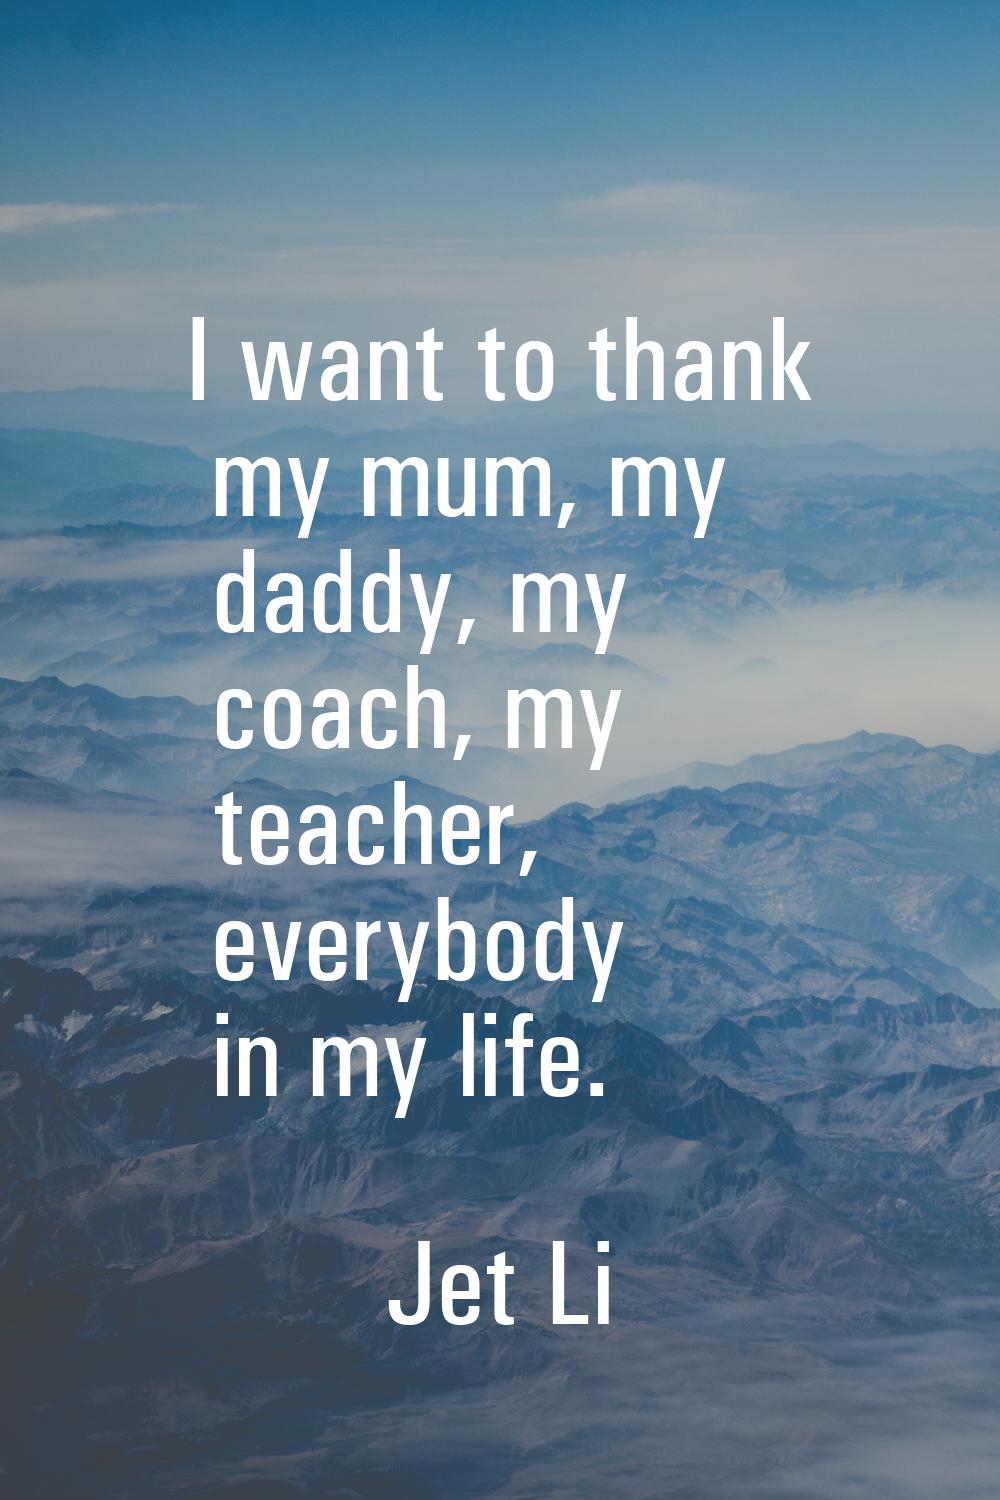 I want to thank my mum, my daddy, my coach, my teacher, everybody in my life.